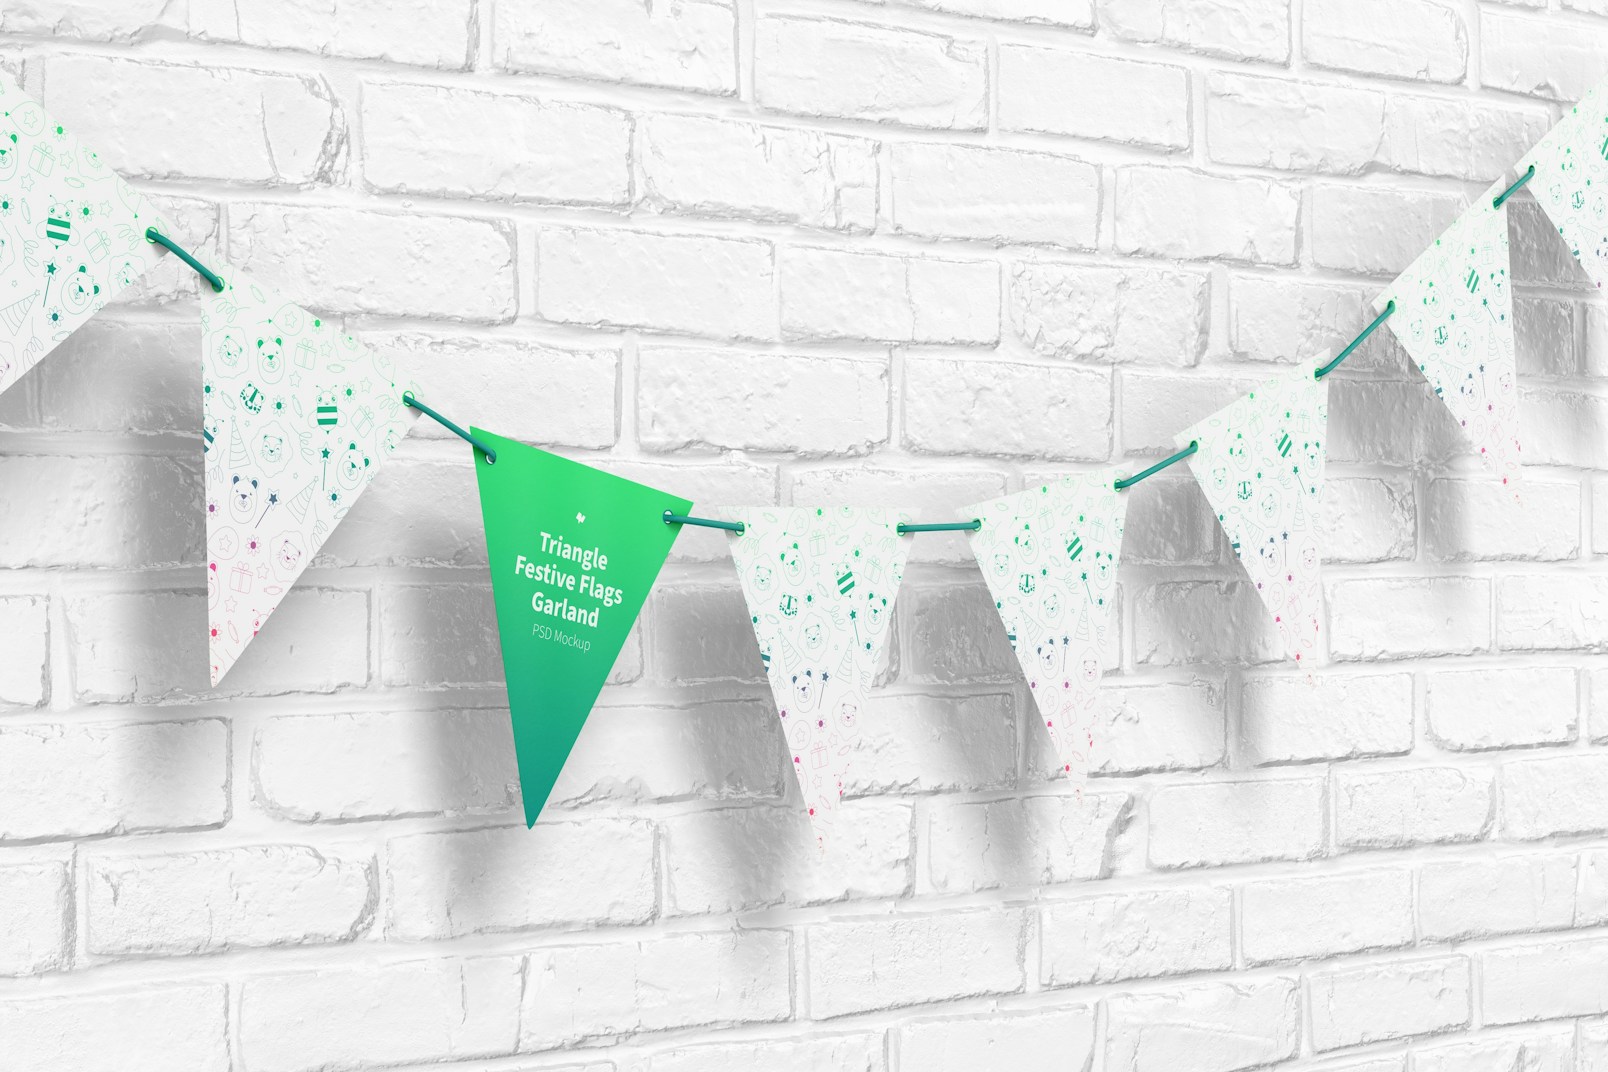 Triangle Festive Flags Garland Mockup, Hanging on Wall